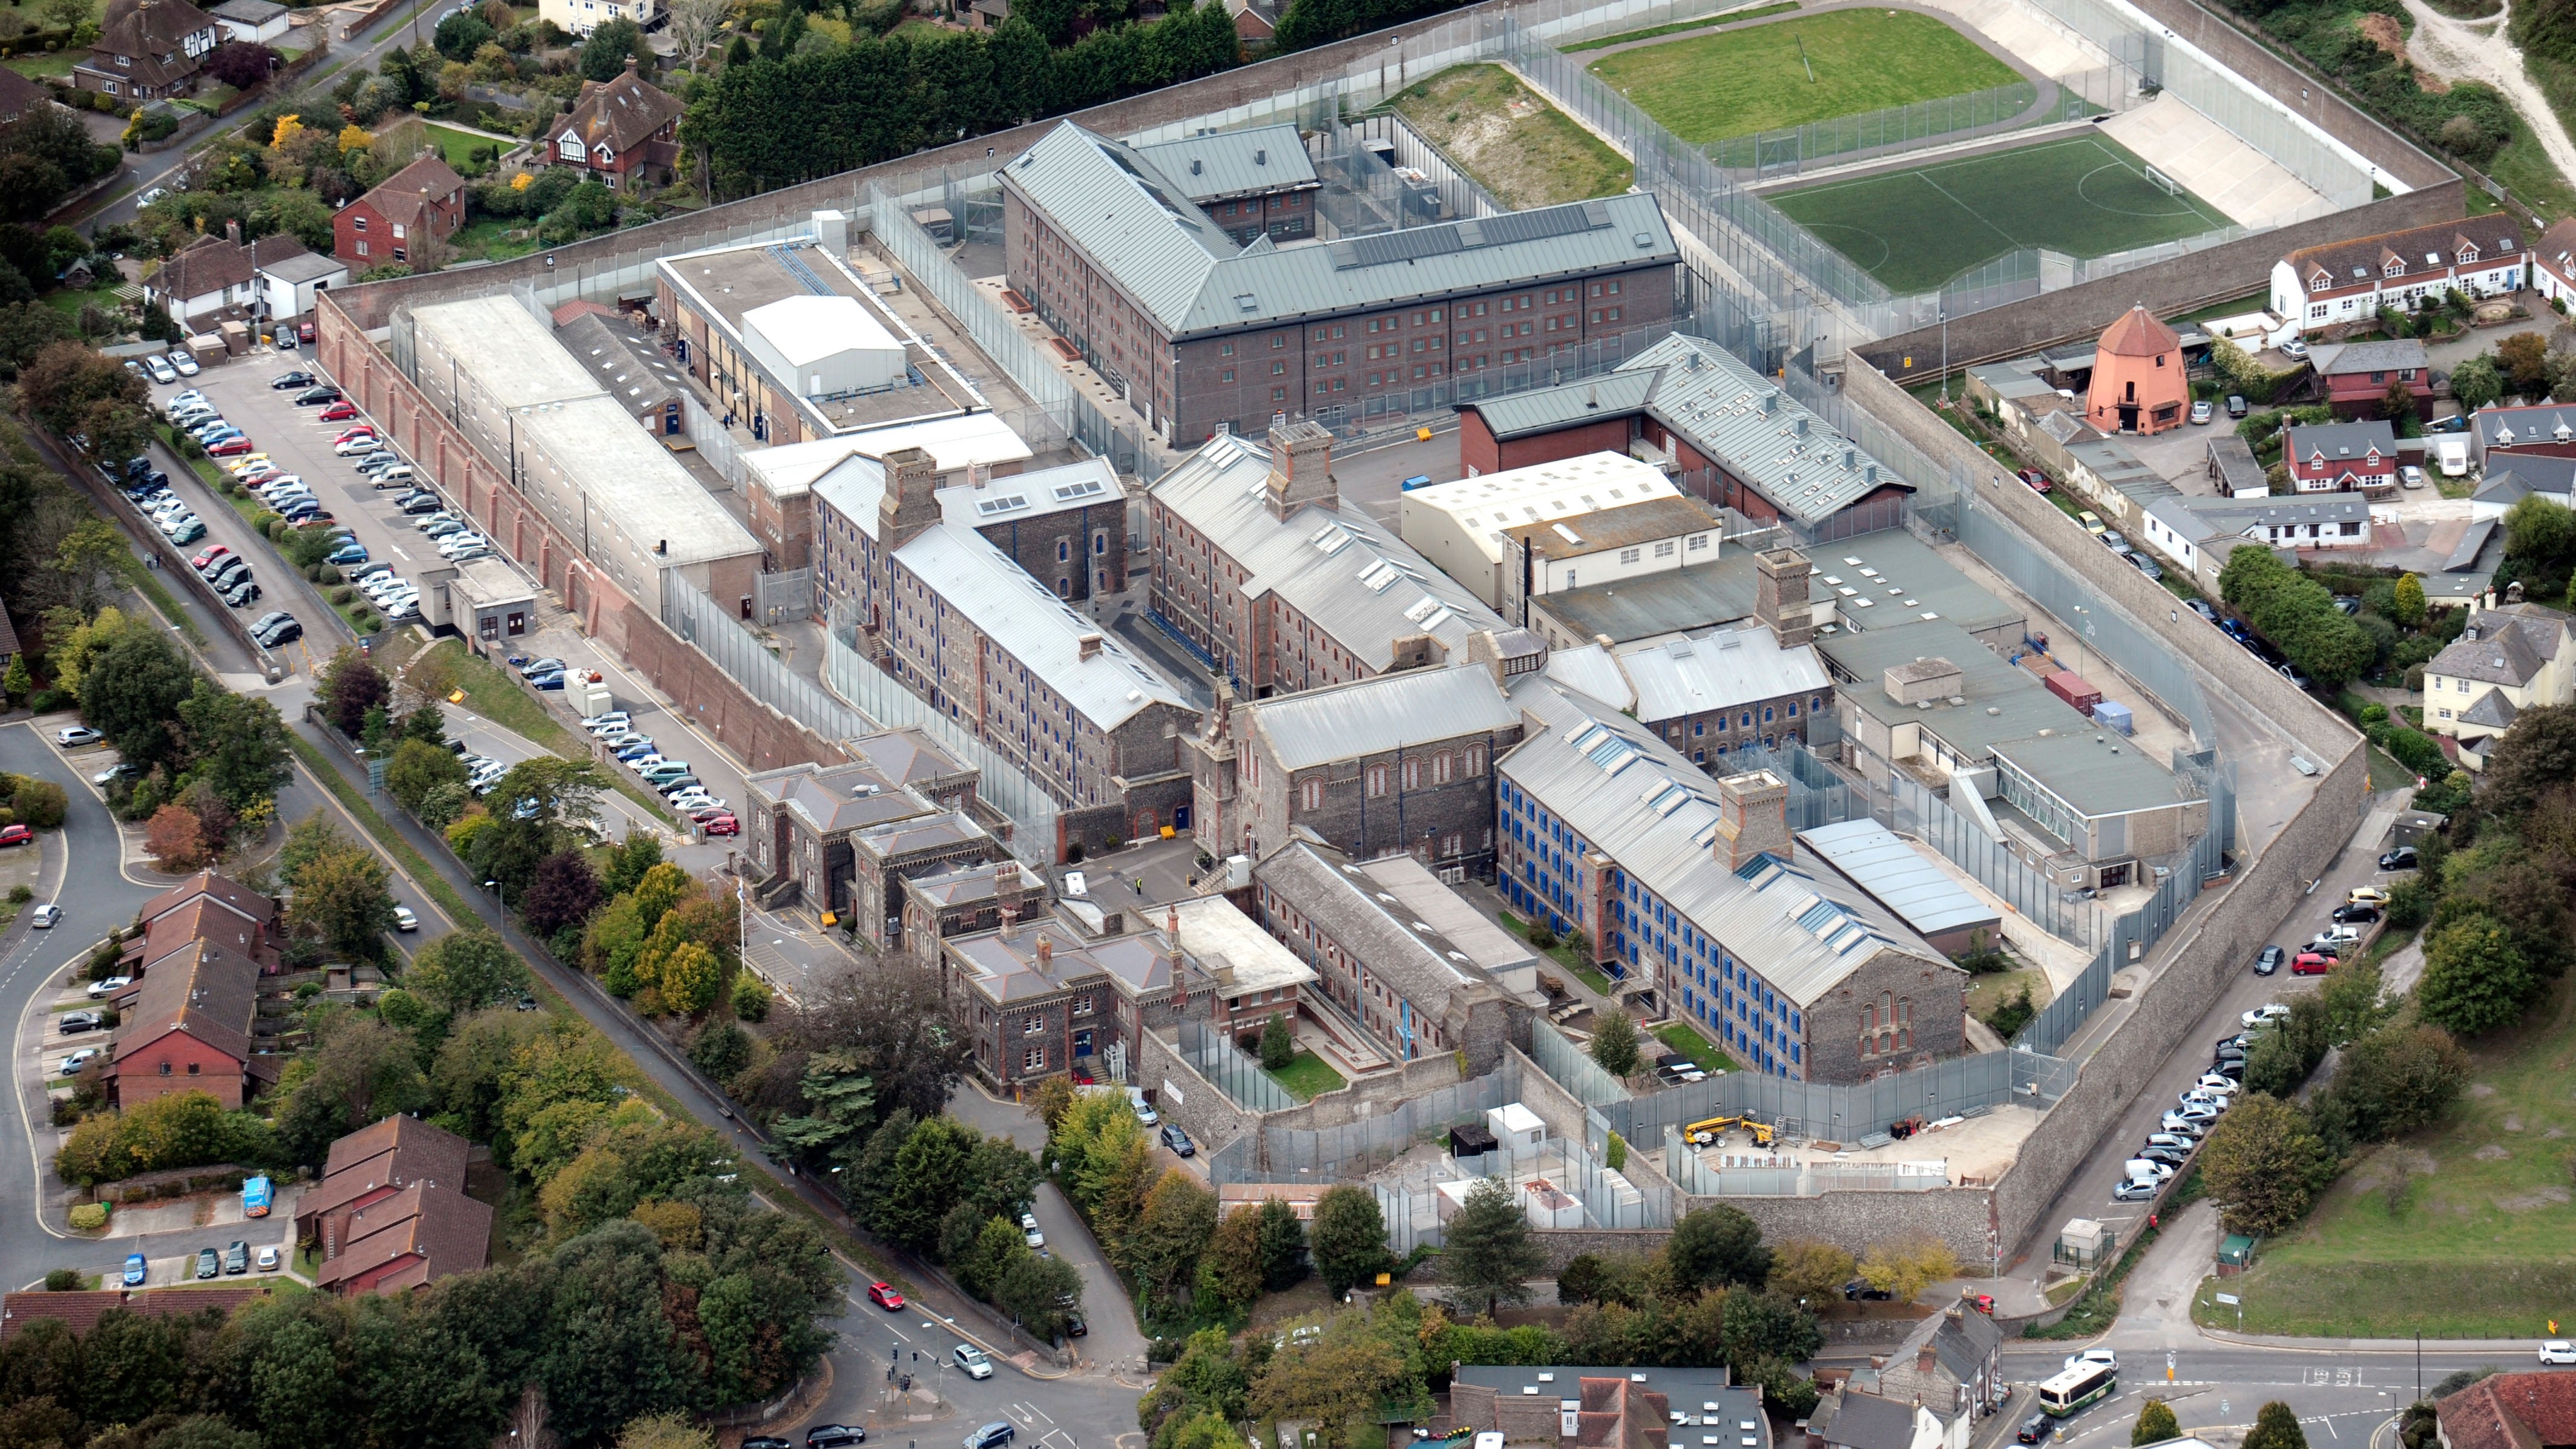 HMP Lewes in East Sussex houses more than 600 inmates